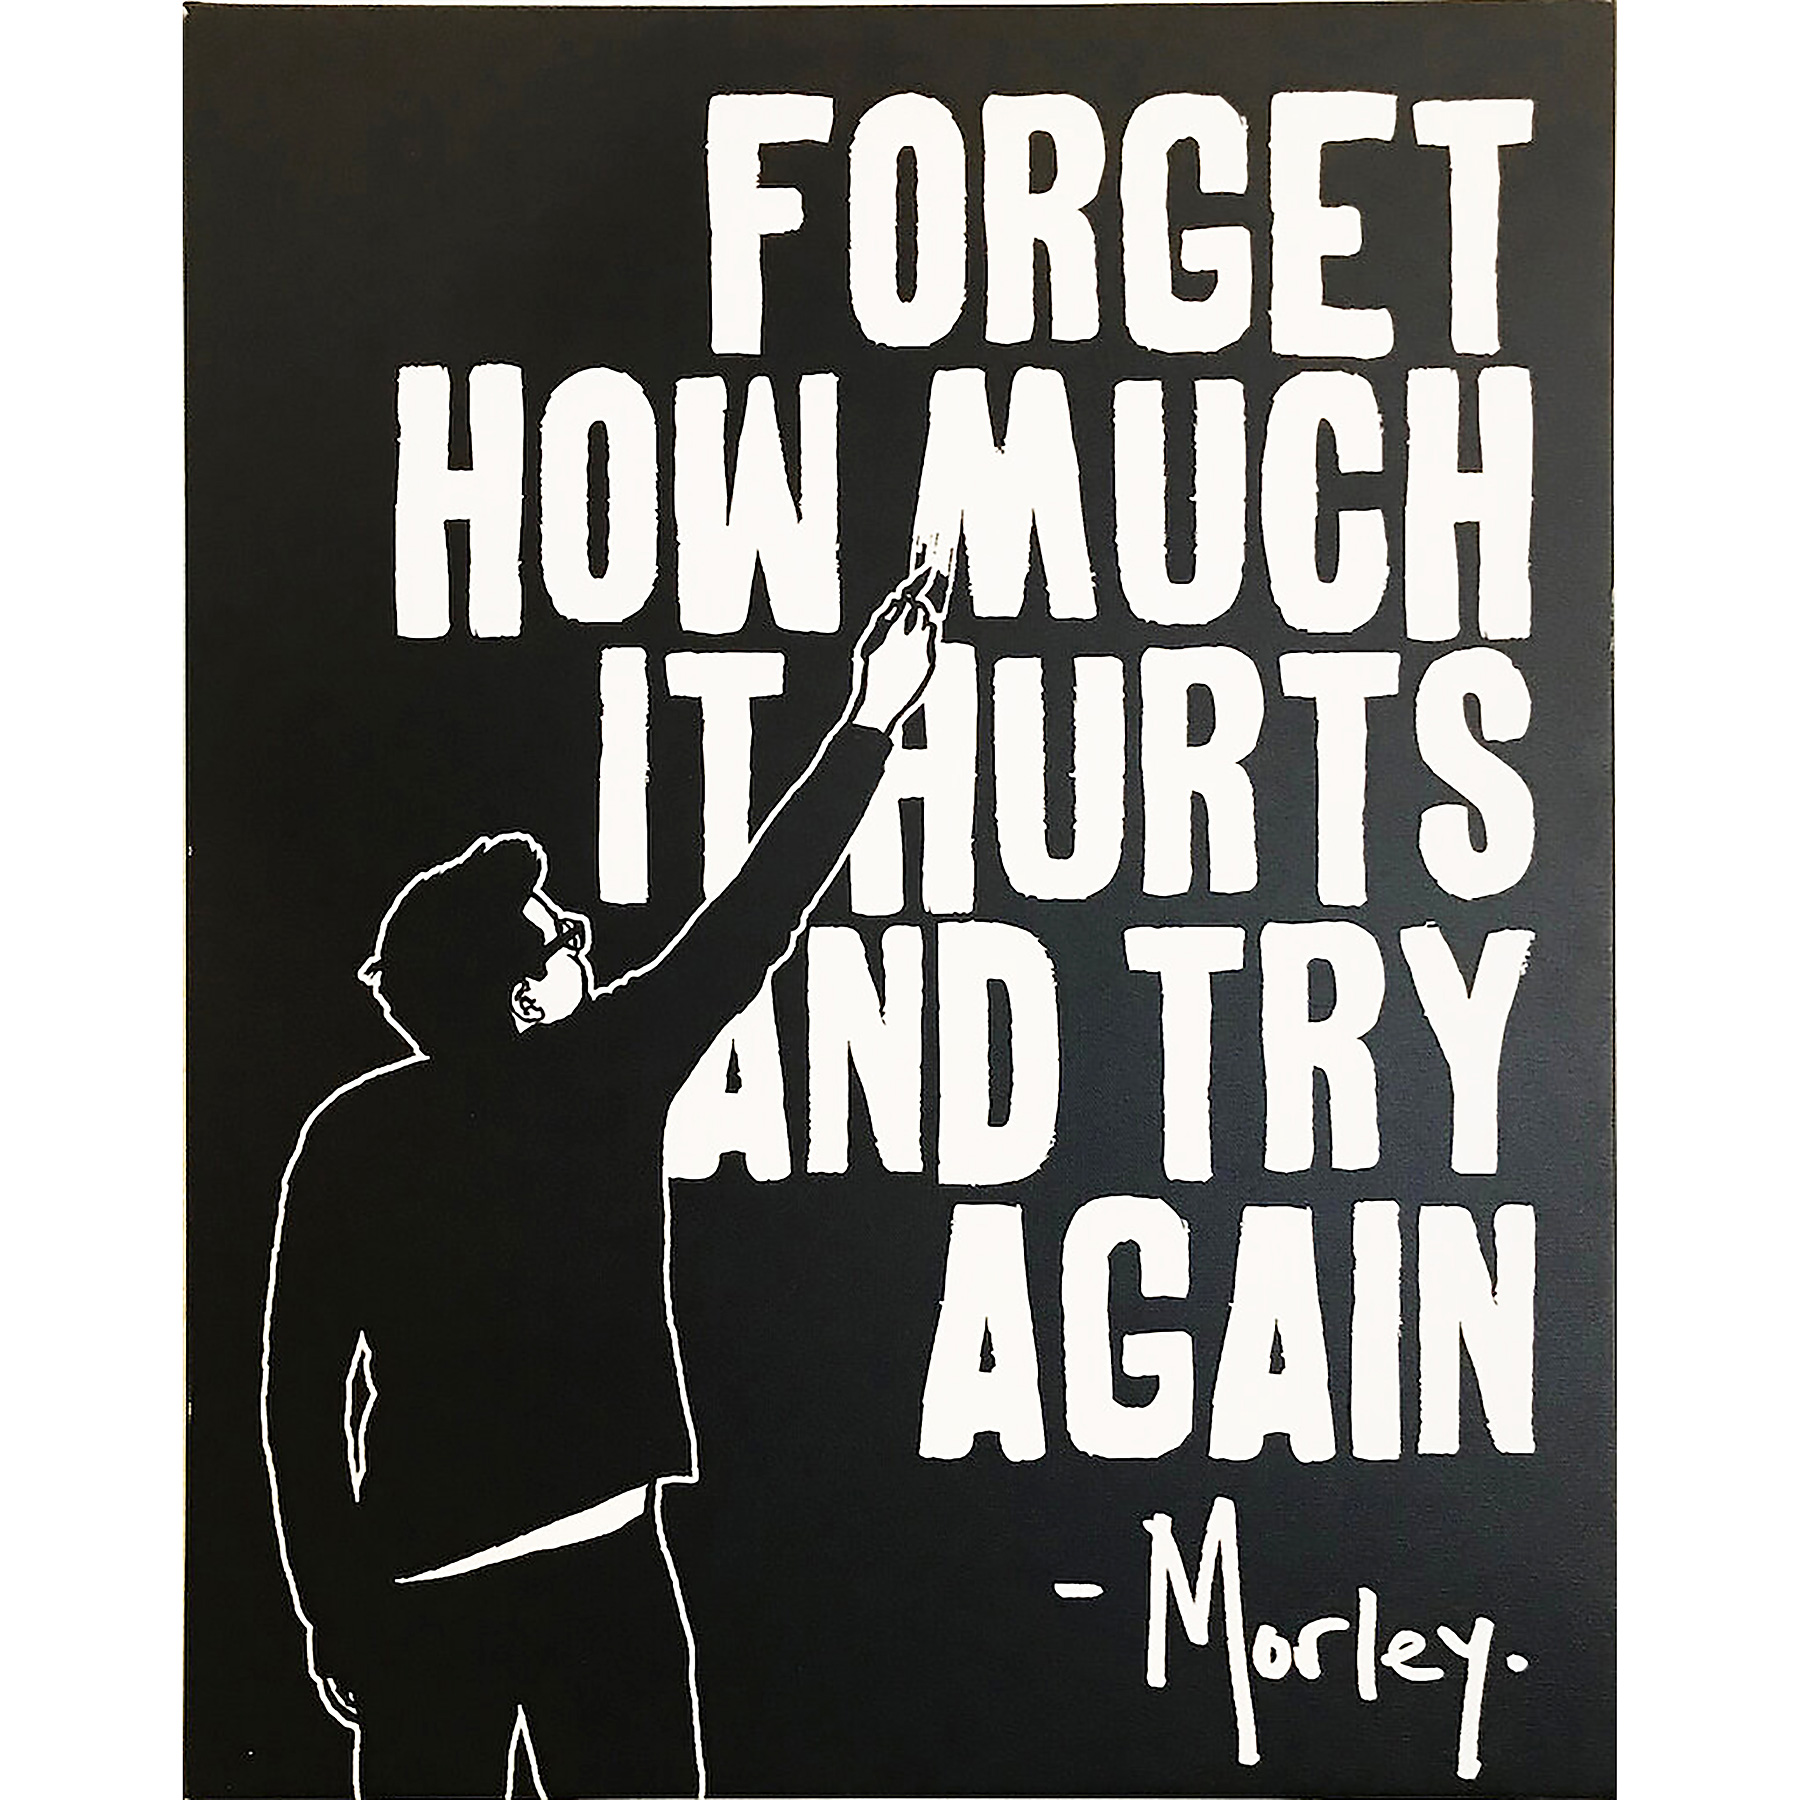 'Forget Hurts' by street artist Morley